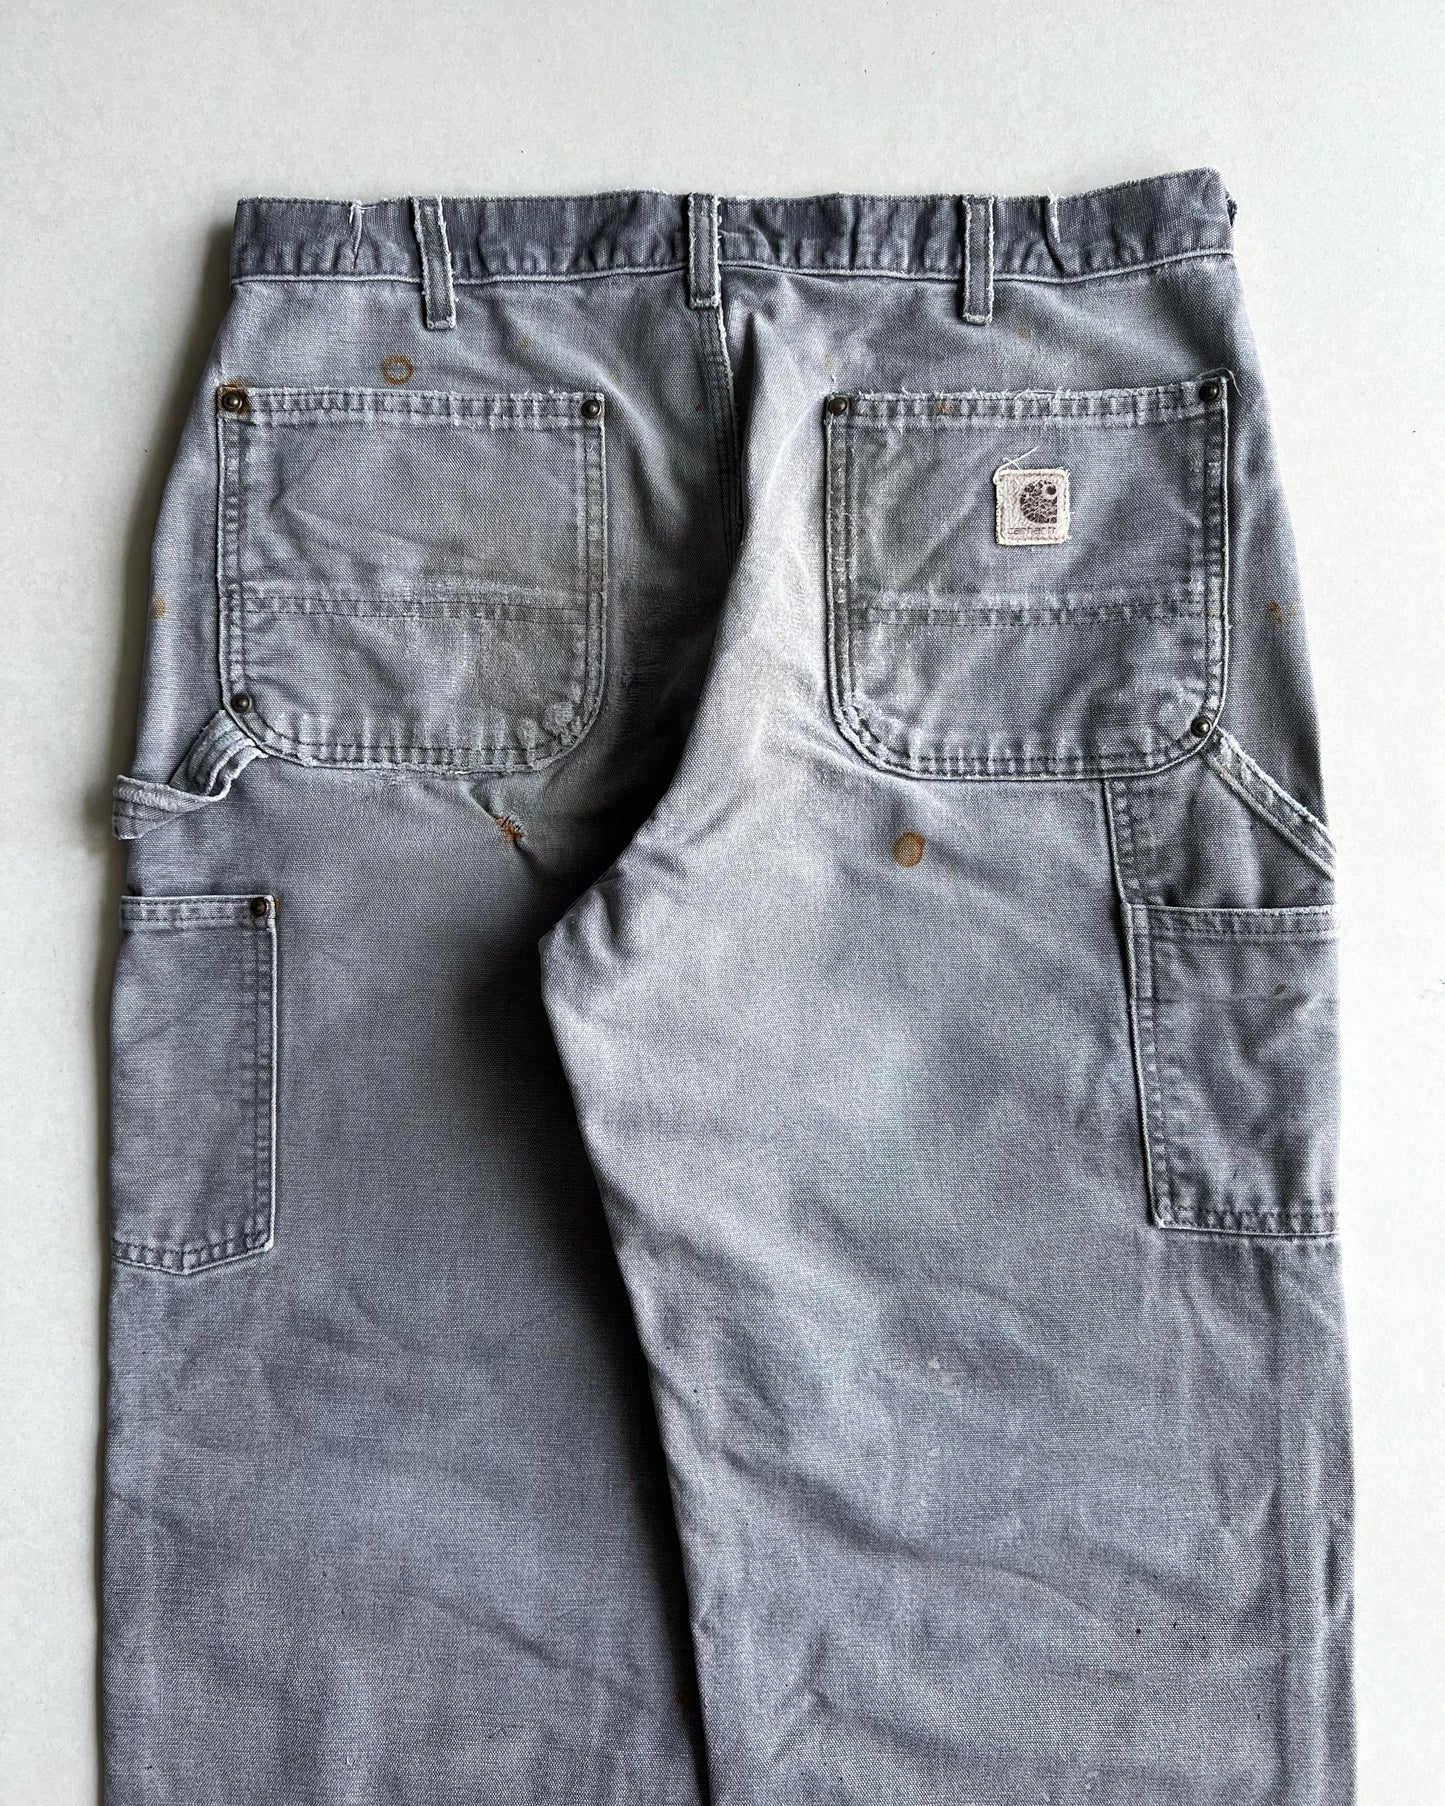 FADED GREY CARHARTT DOUBLE KNEE DISTRESSED PANTS (34X32)